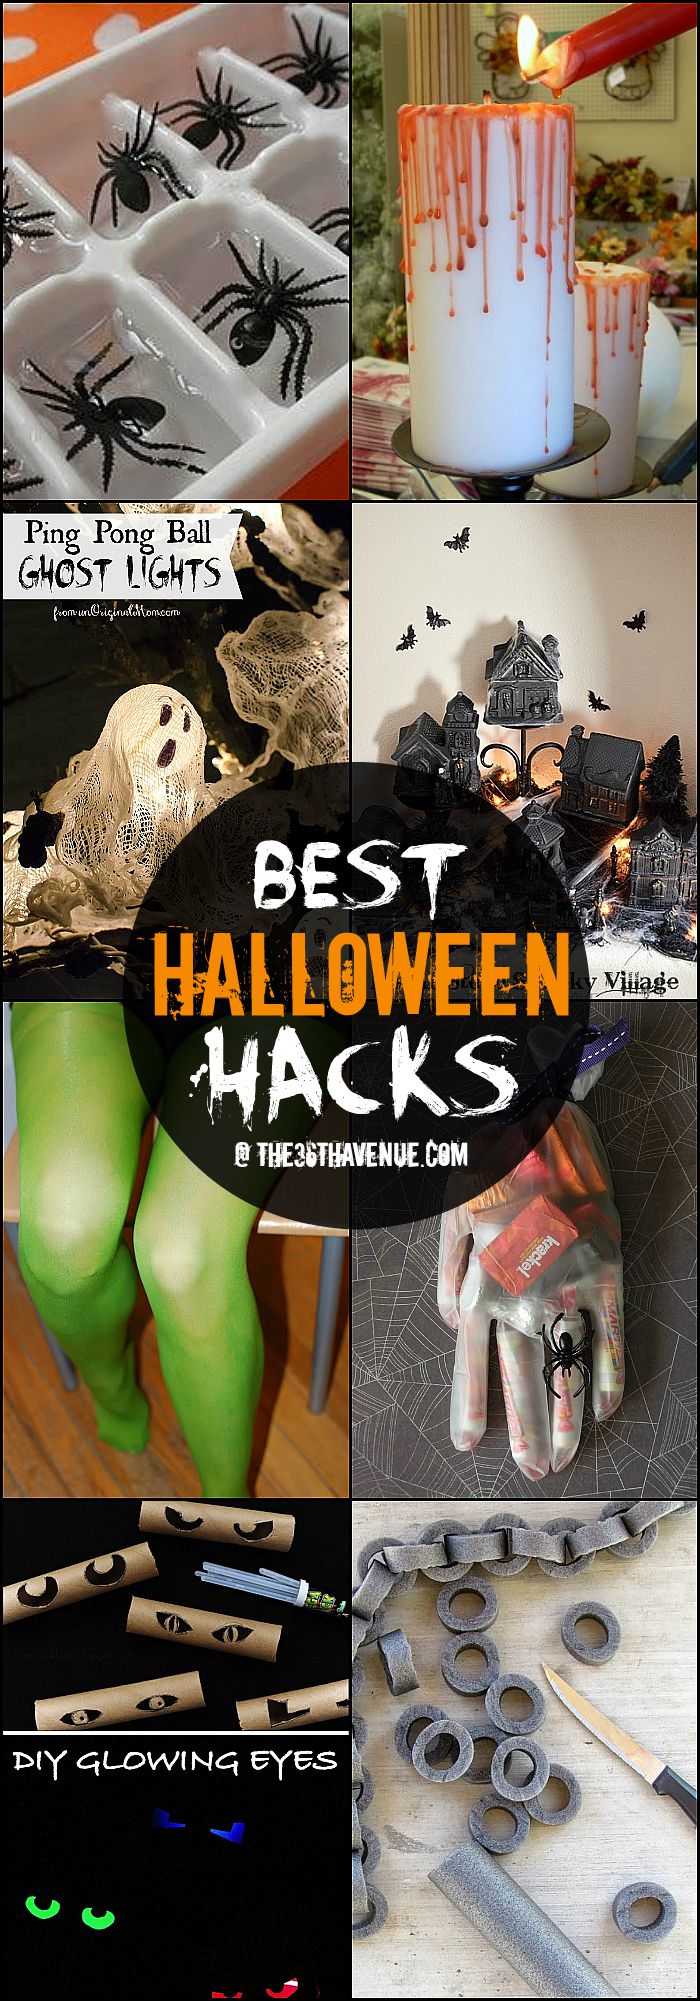 Halloween Hacks and DIY Decor Ideas at the36thavenue.com ...Pinning for later!